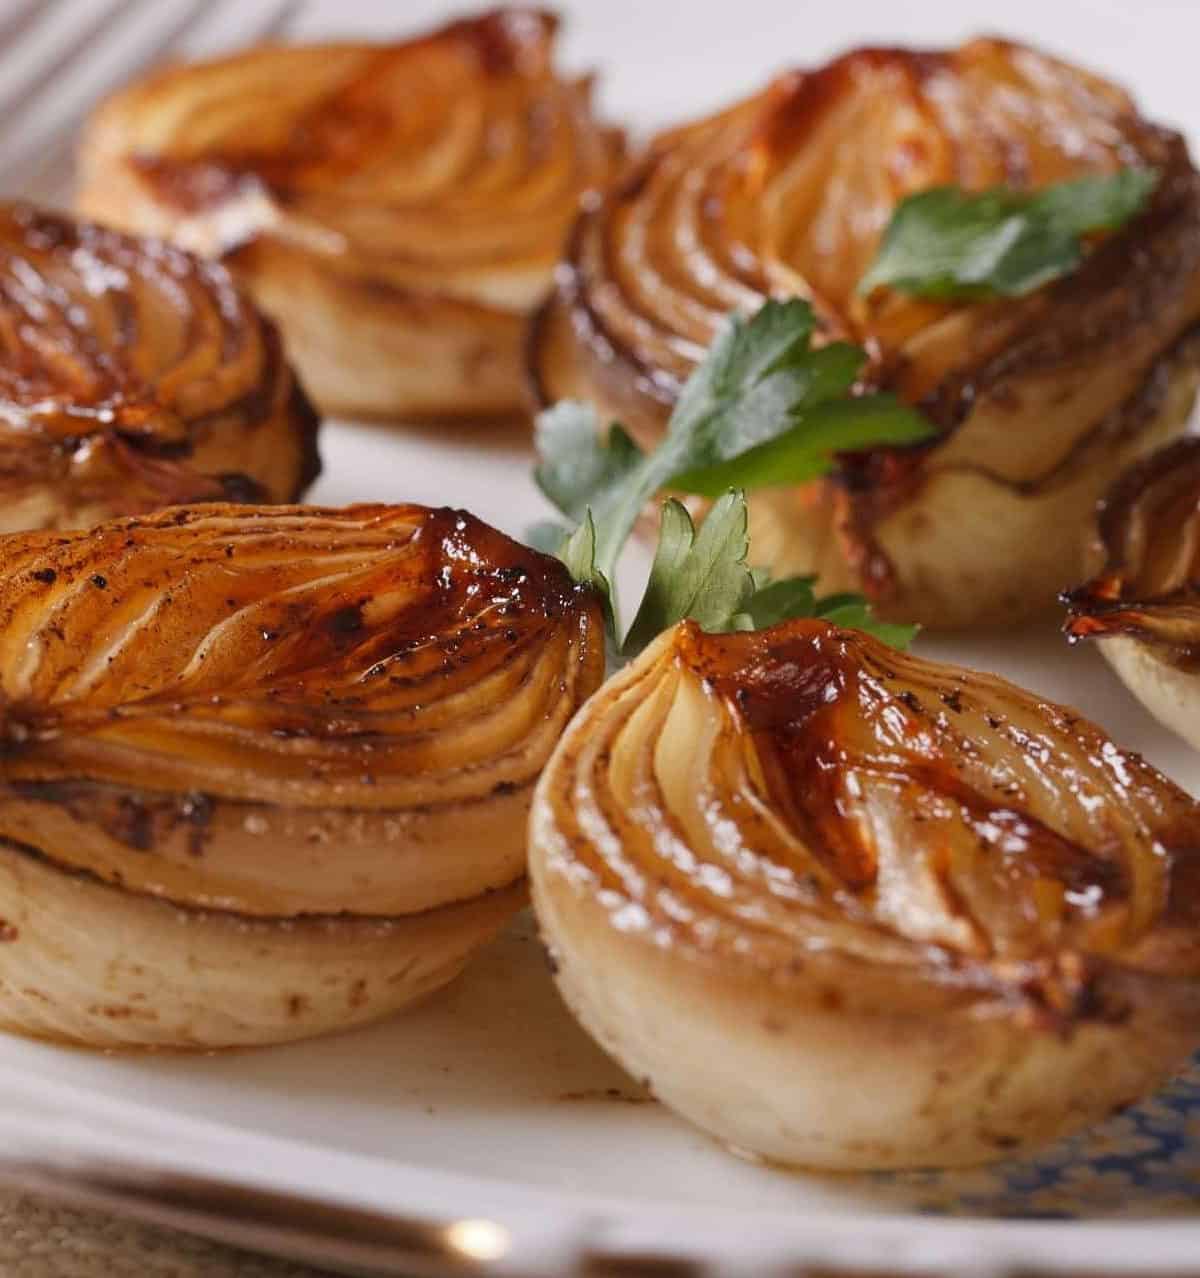  You won't be able to resist the savory aroma of these caramelized onions.